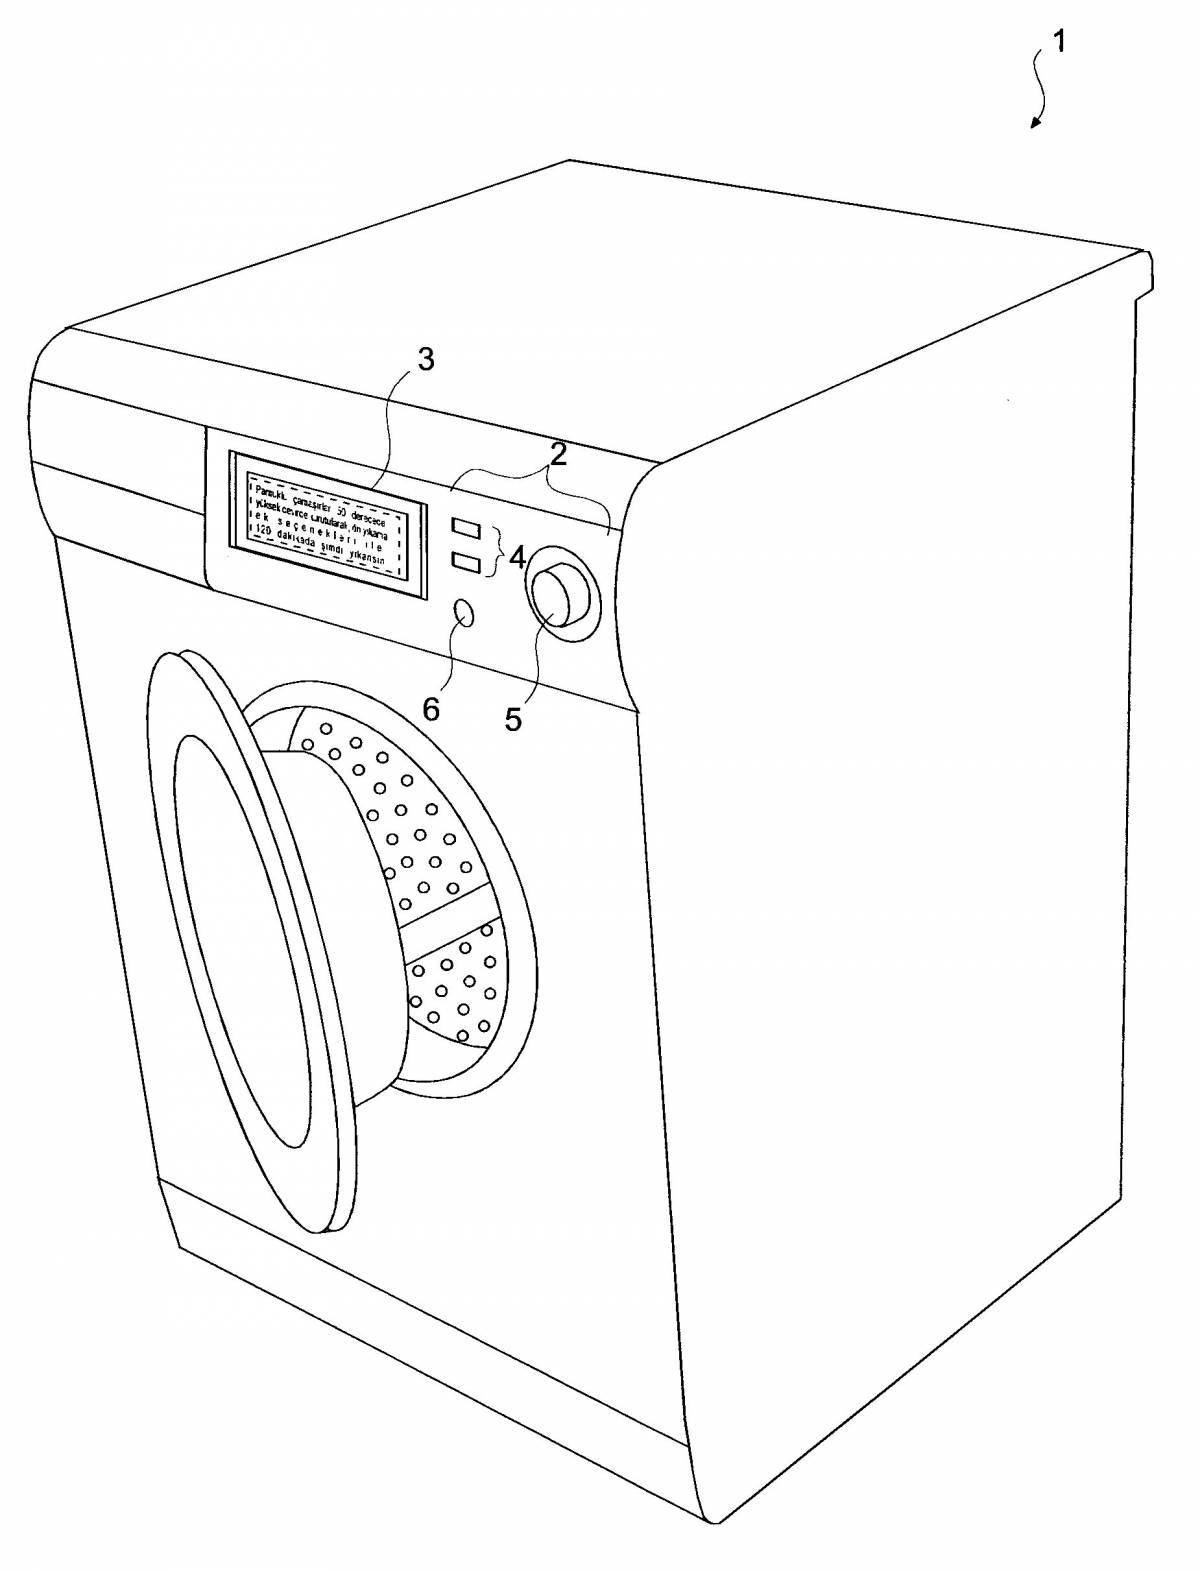 Colorful baby washing machine coloring page